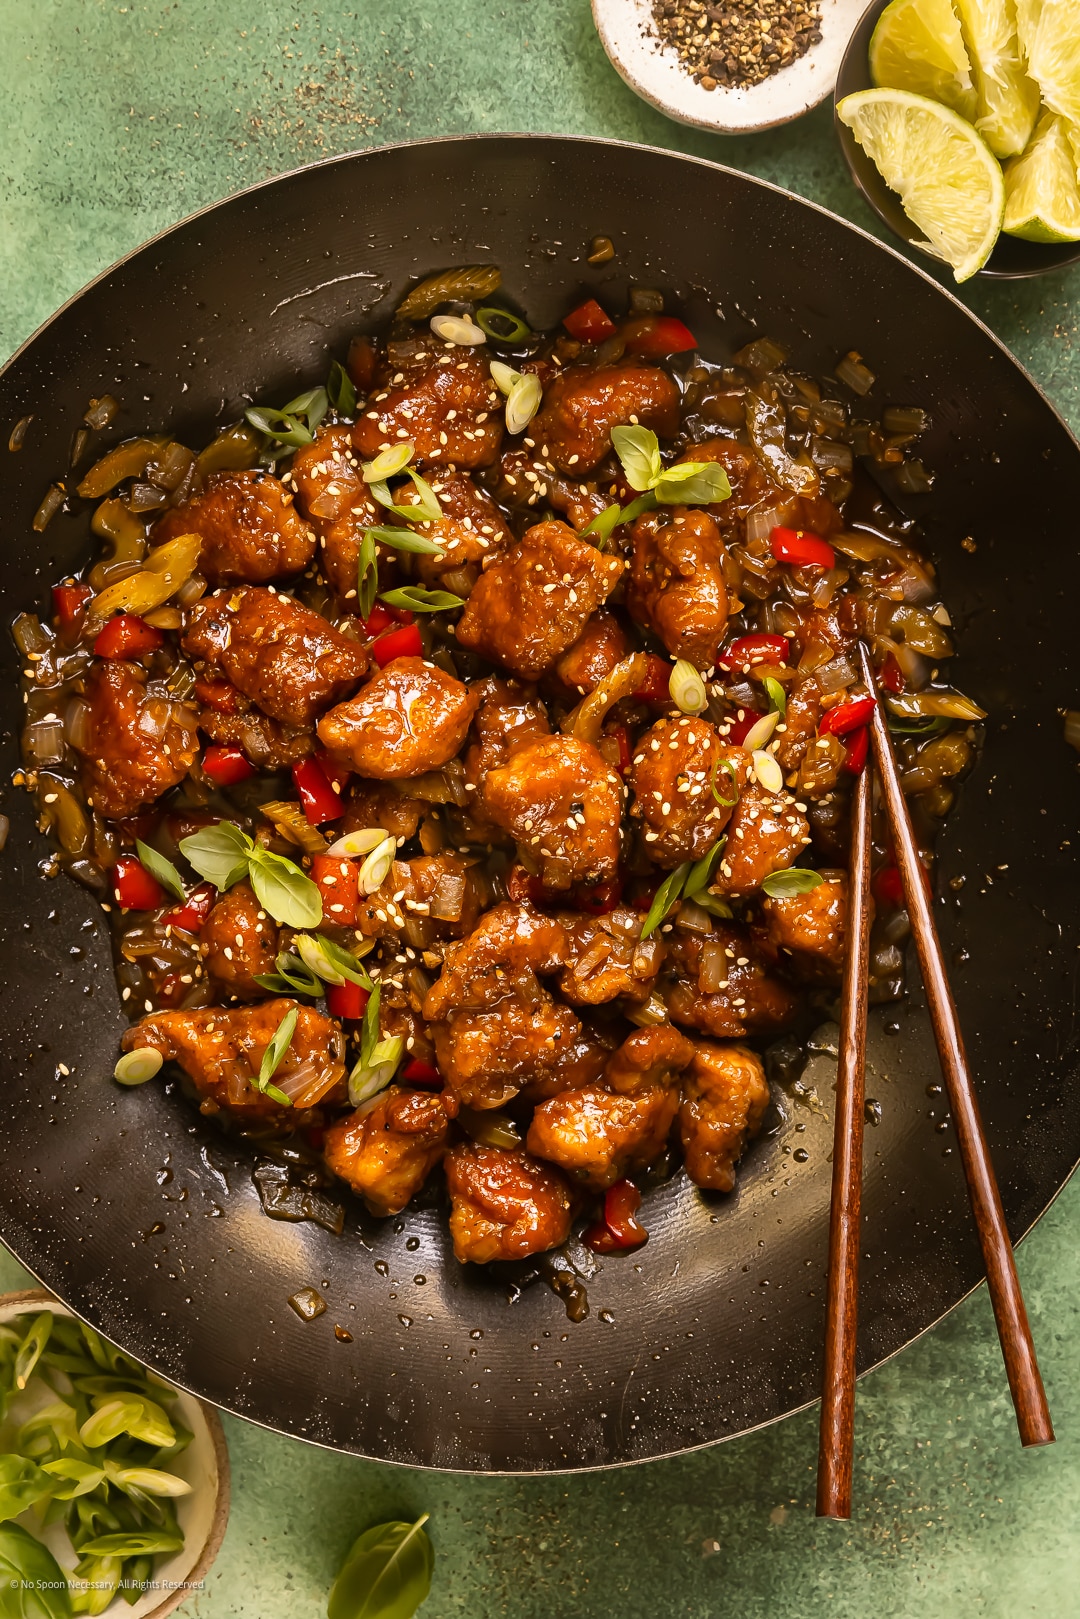 Overhead photo of stir-fried peppered chicken with veggies in a black wok.